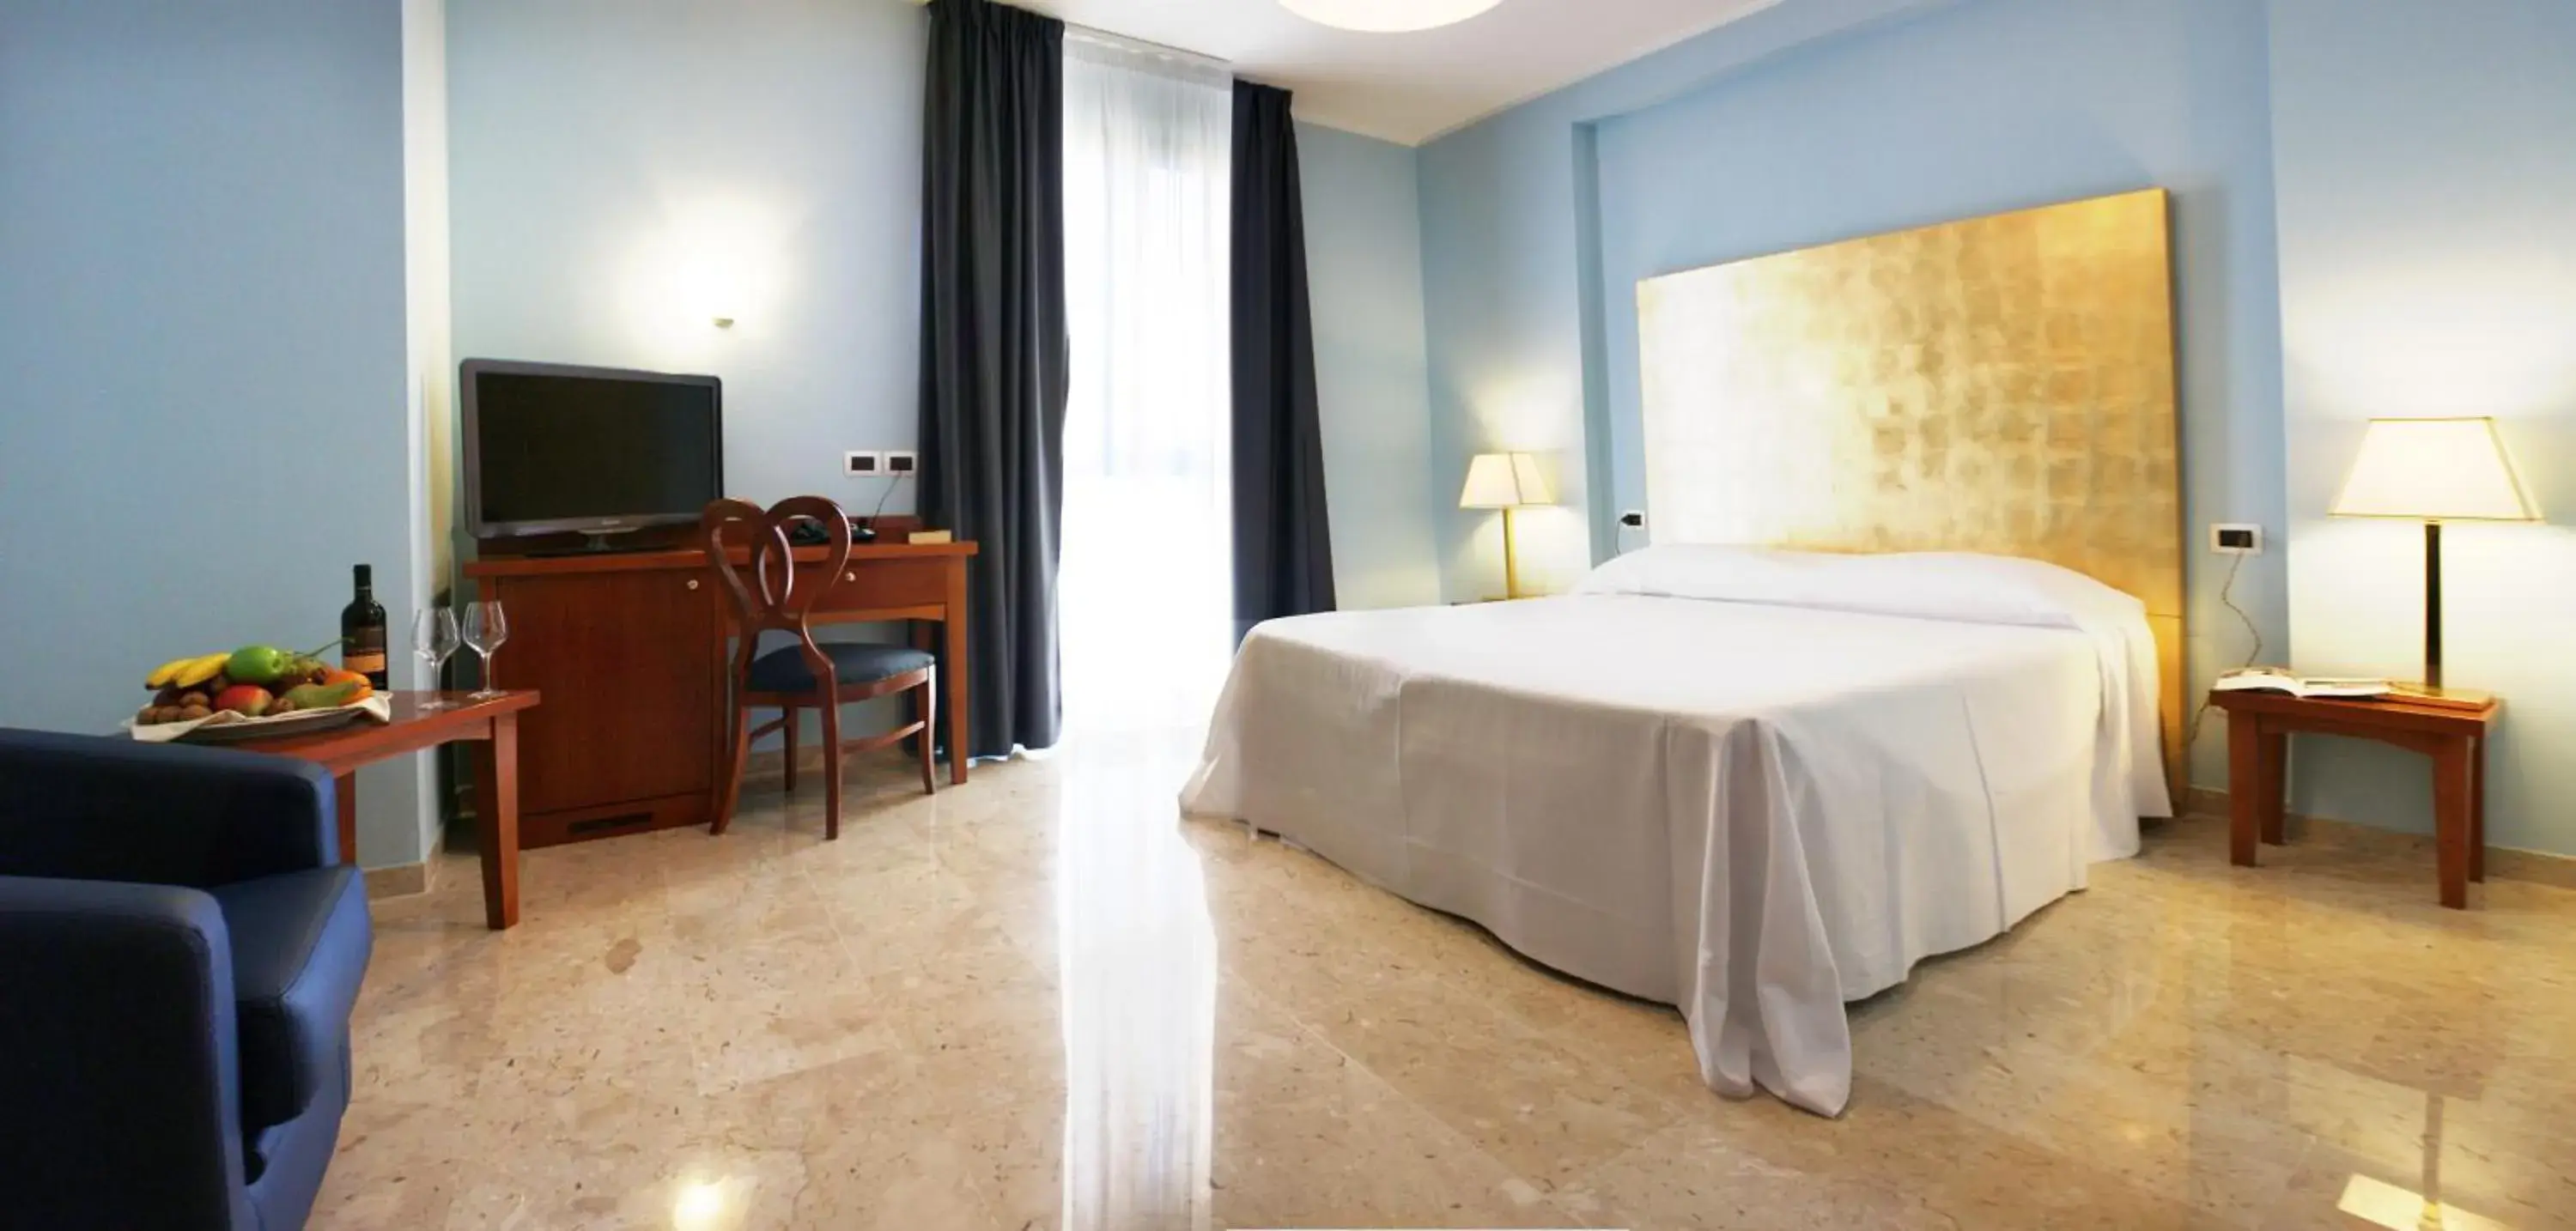 Superior Double Room with Terrace and Spa Access in Hotel Terme Marine Leopoldo Ii